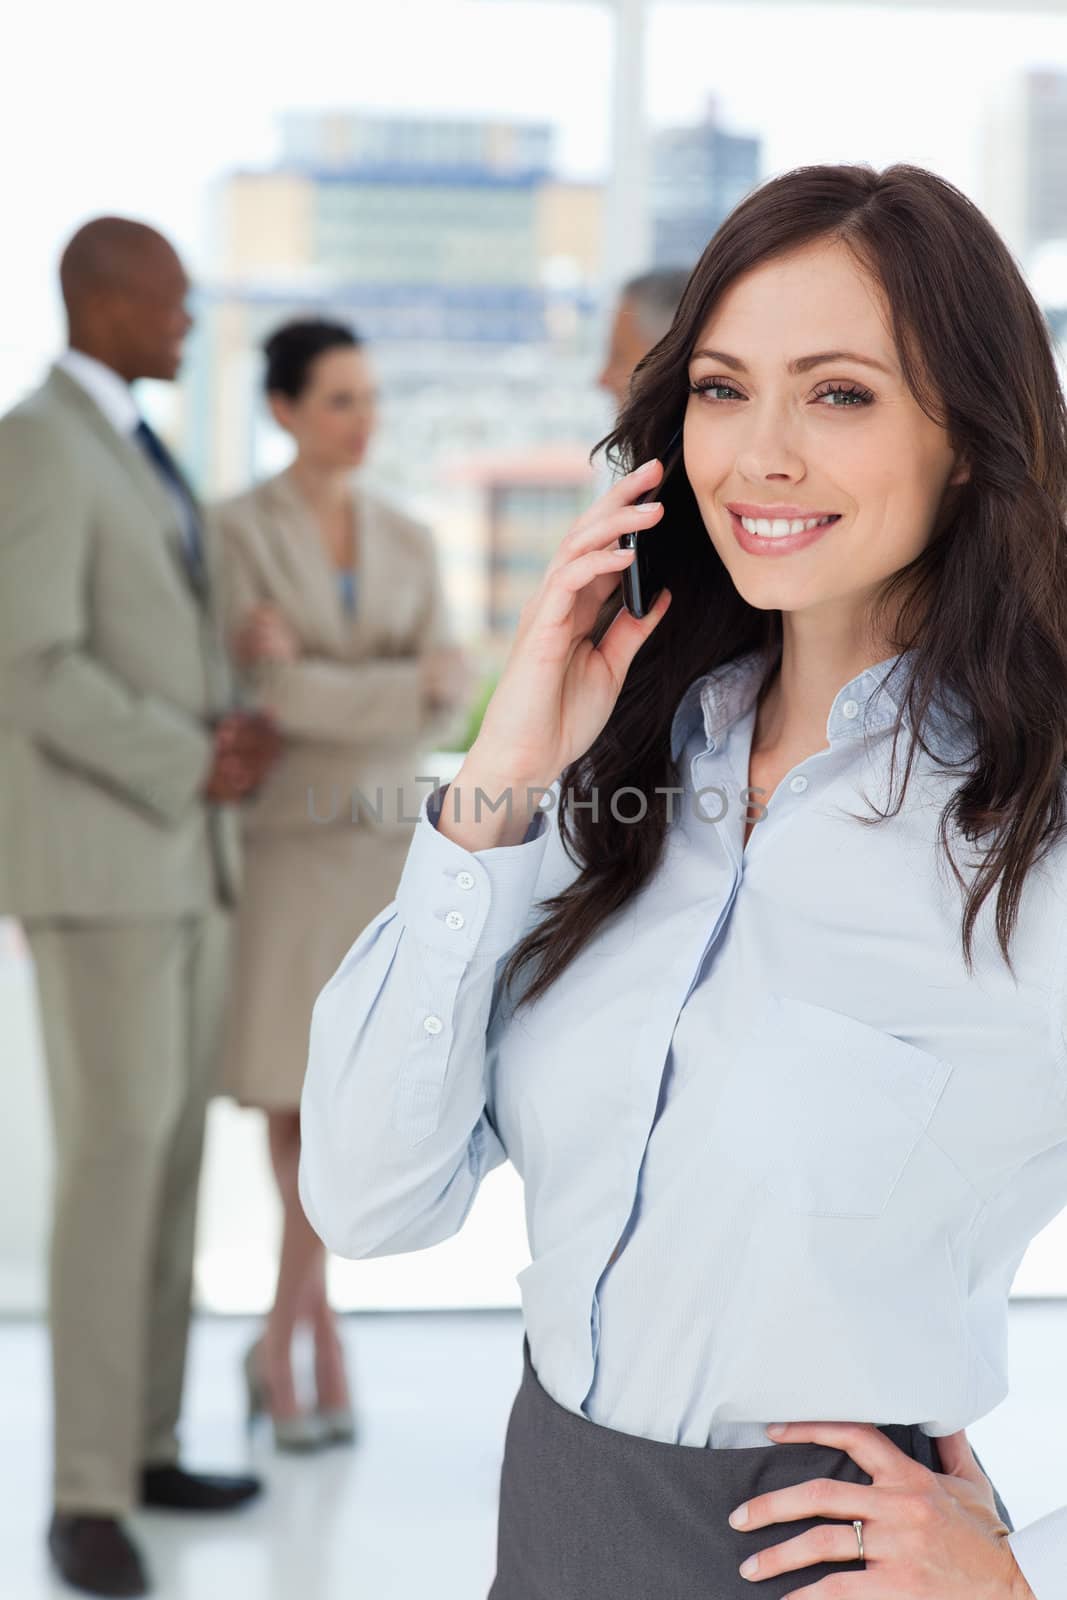 Smiling businesswoman talking on the phone with one hand on her  by Wavebreakmedia